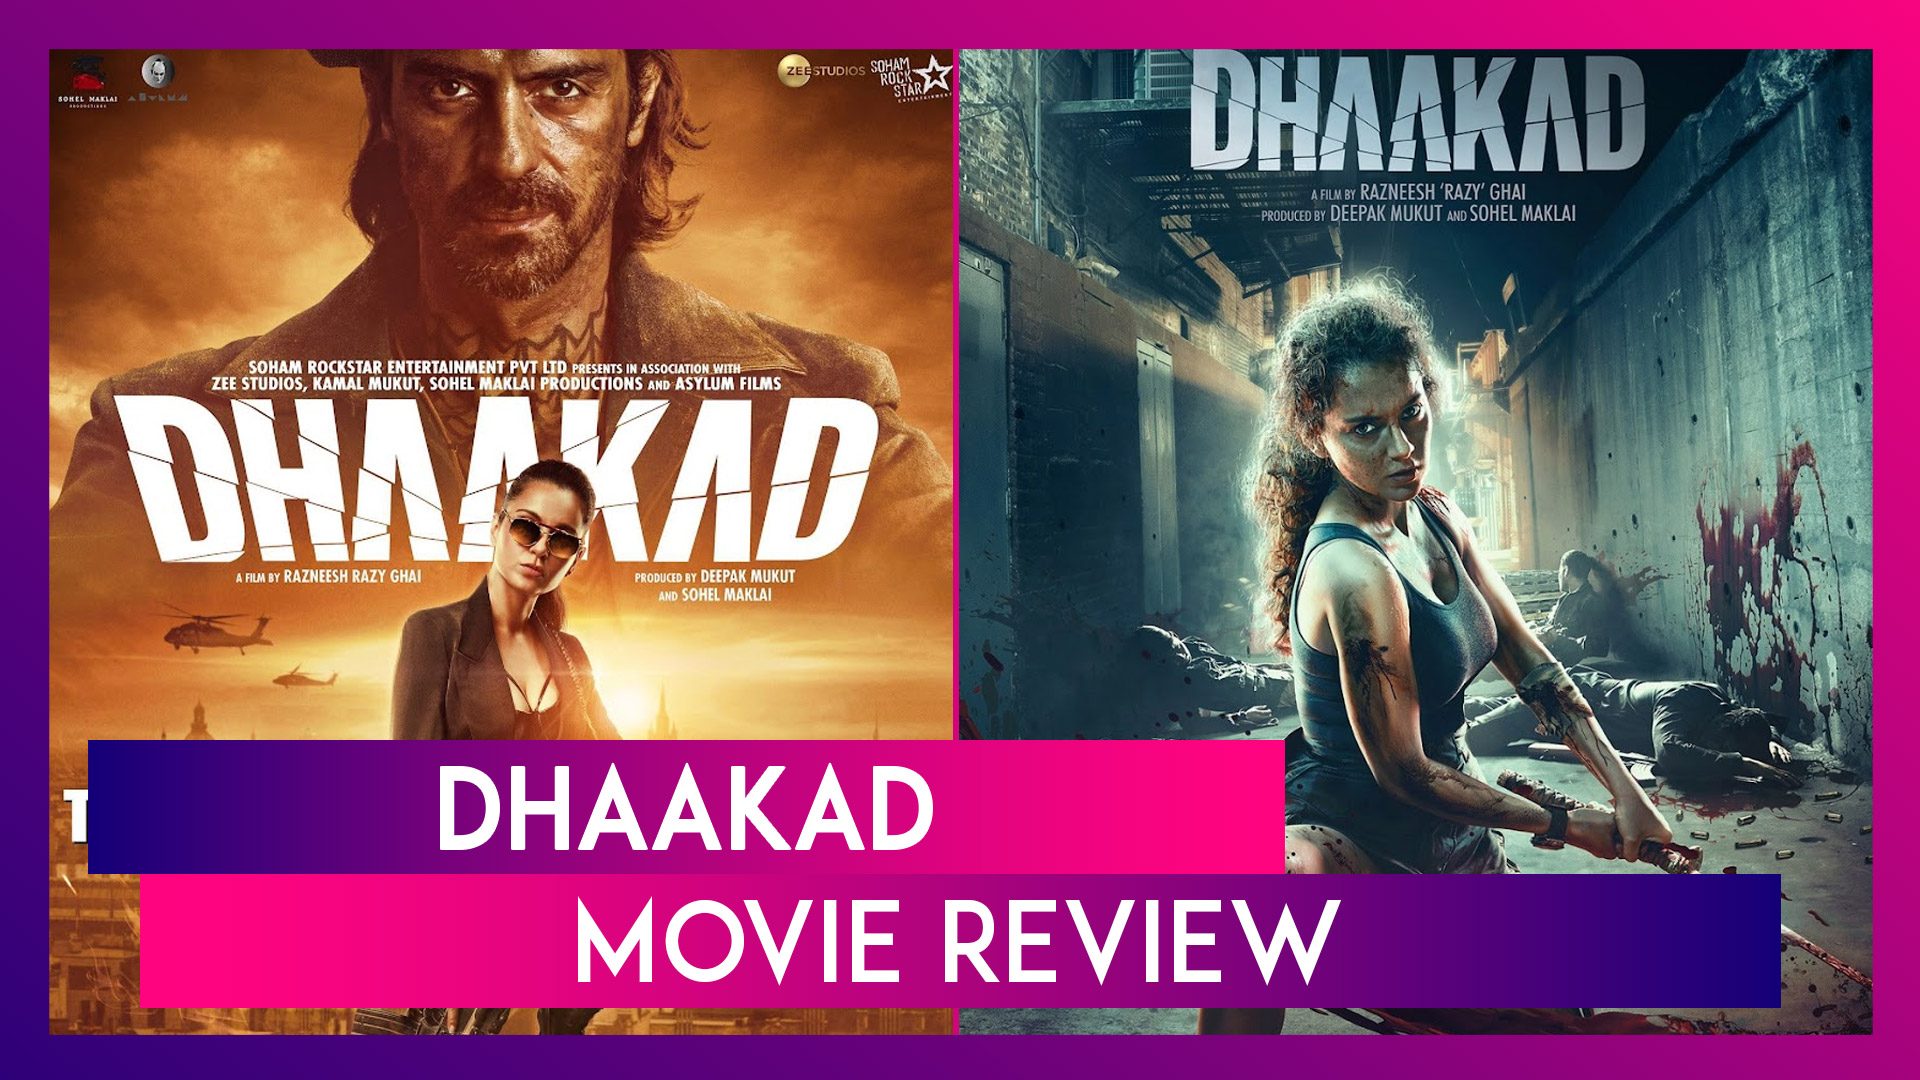 Dhaakad Movie Review: Kangana Ranuat’s Performance Just Cannot Be Missed In This Action Thriller!